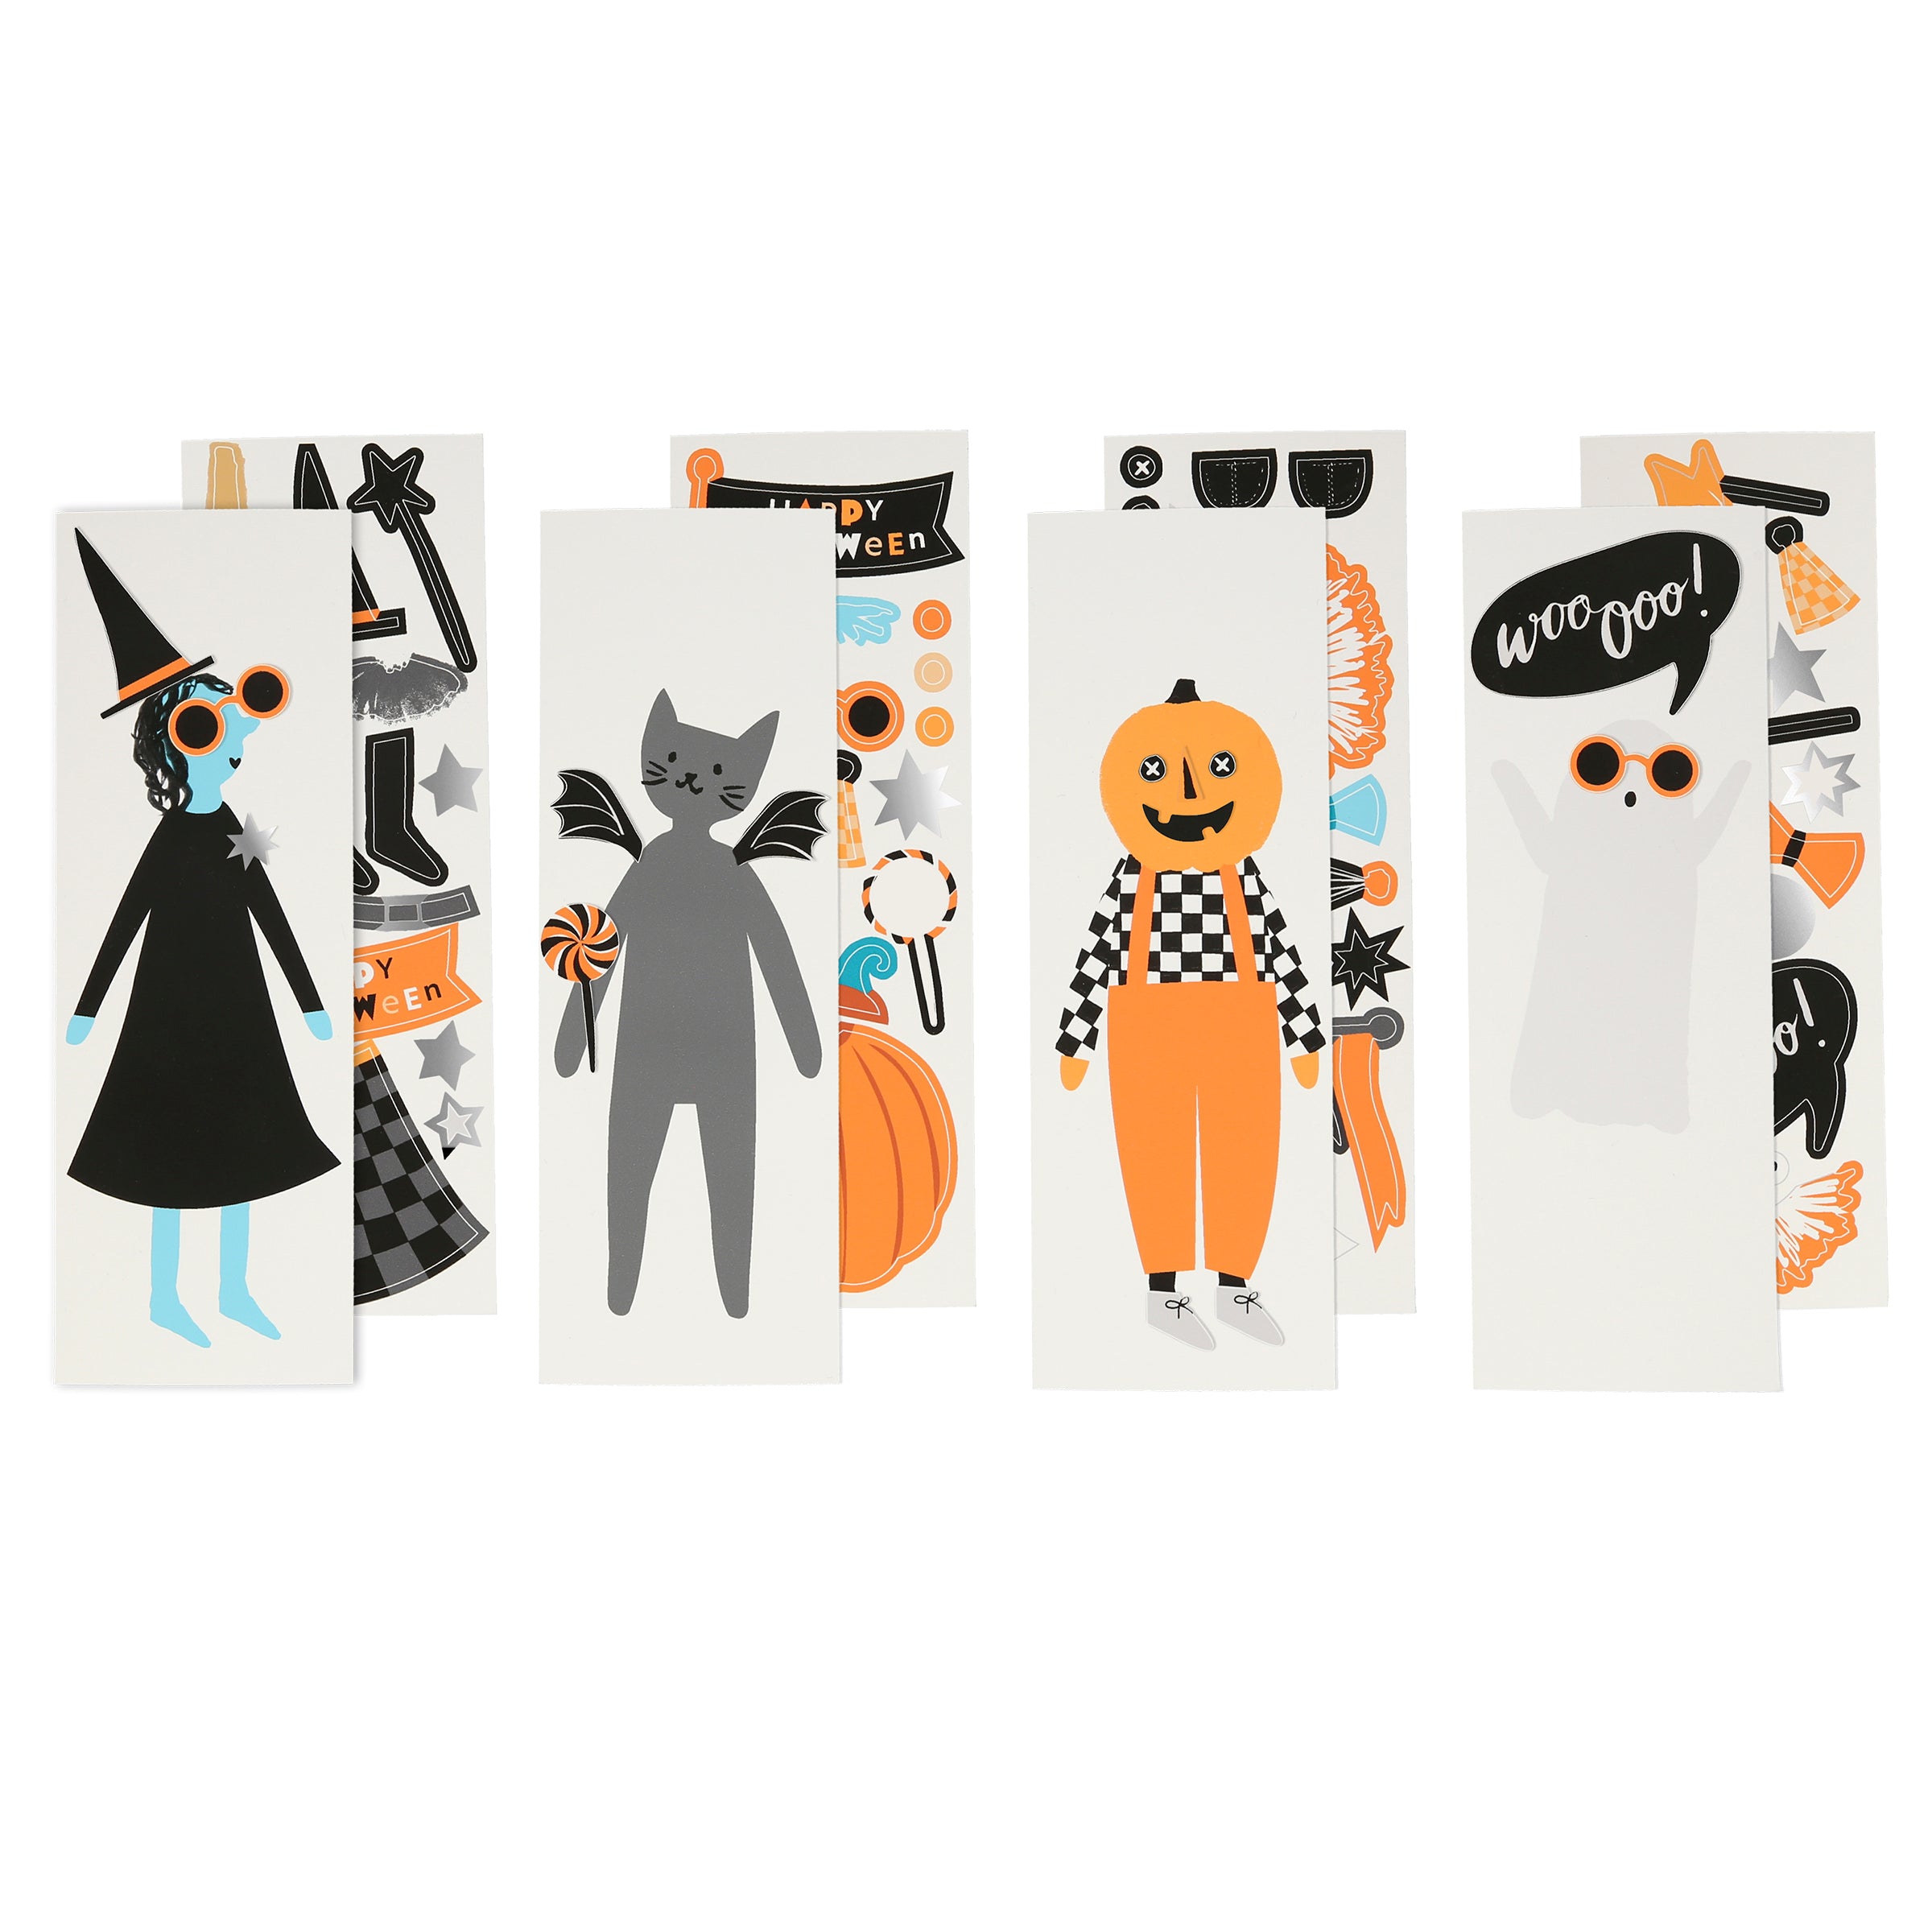 Our Halloween crackers, which includes pumpkin crackers, contain paper dolls and Halloween stickers.